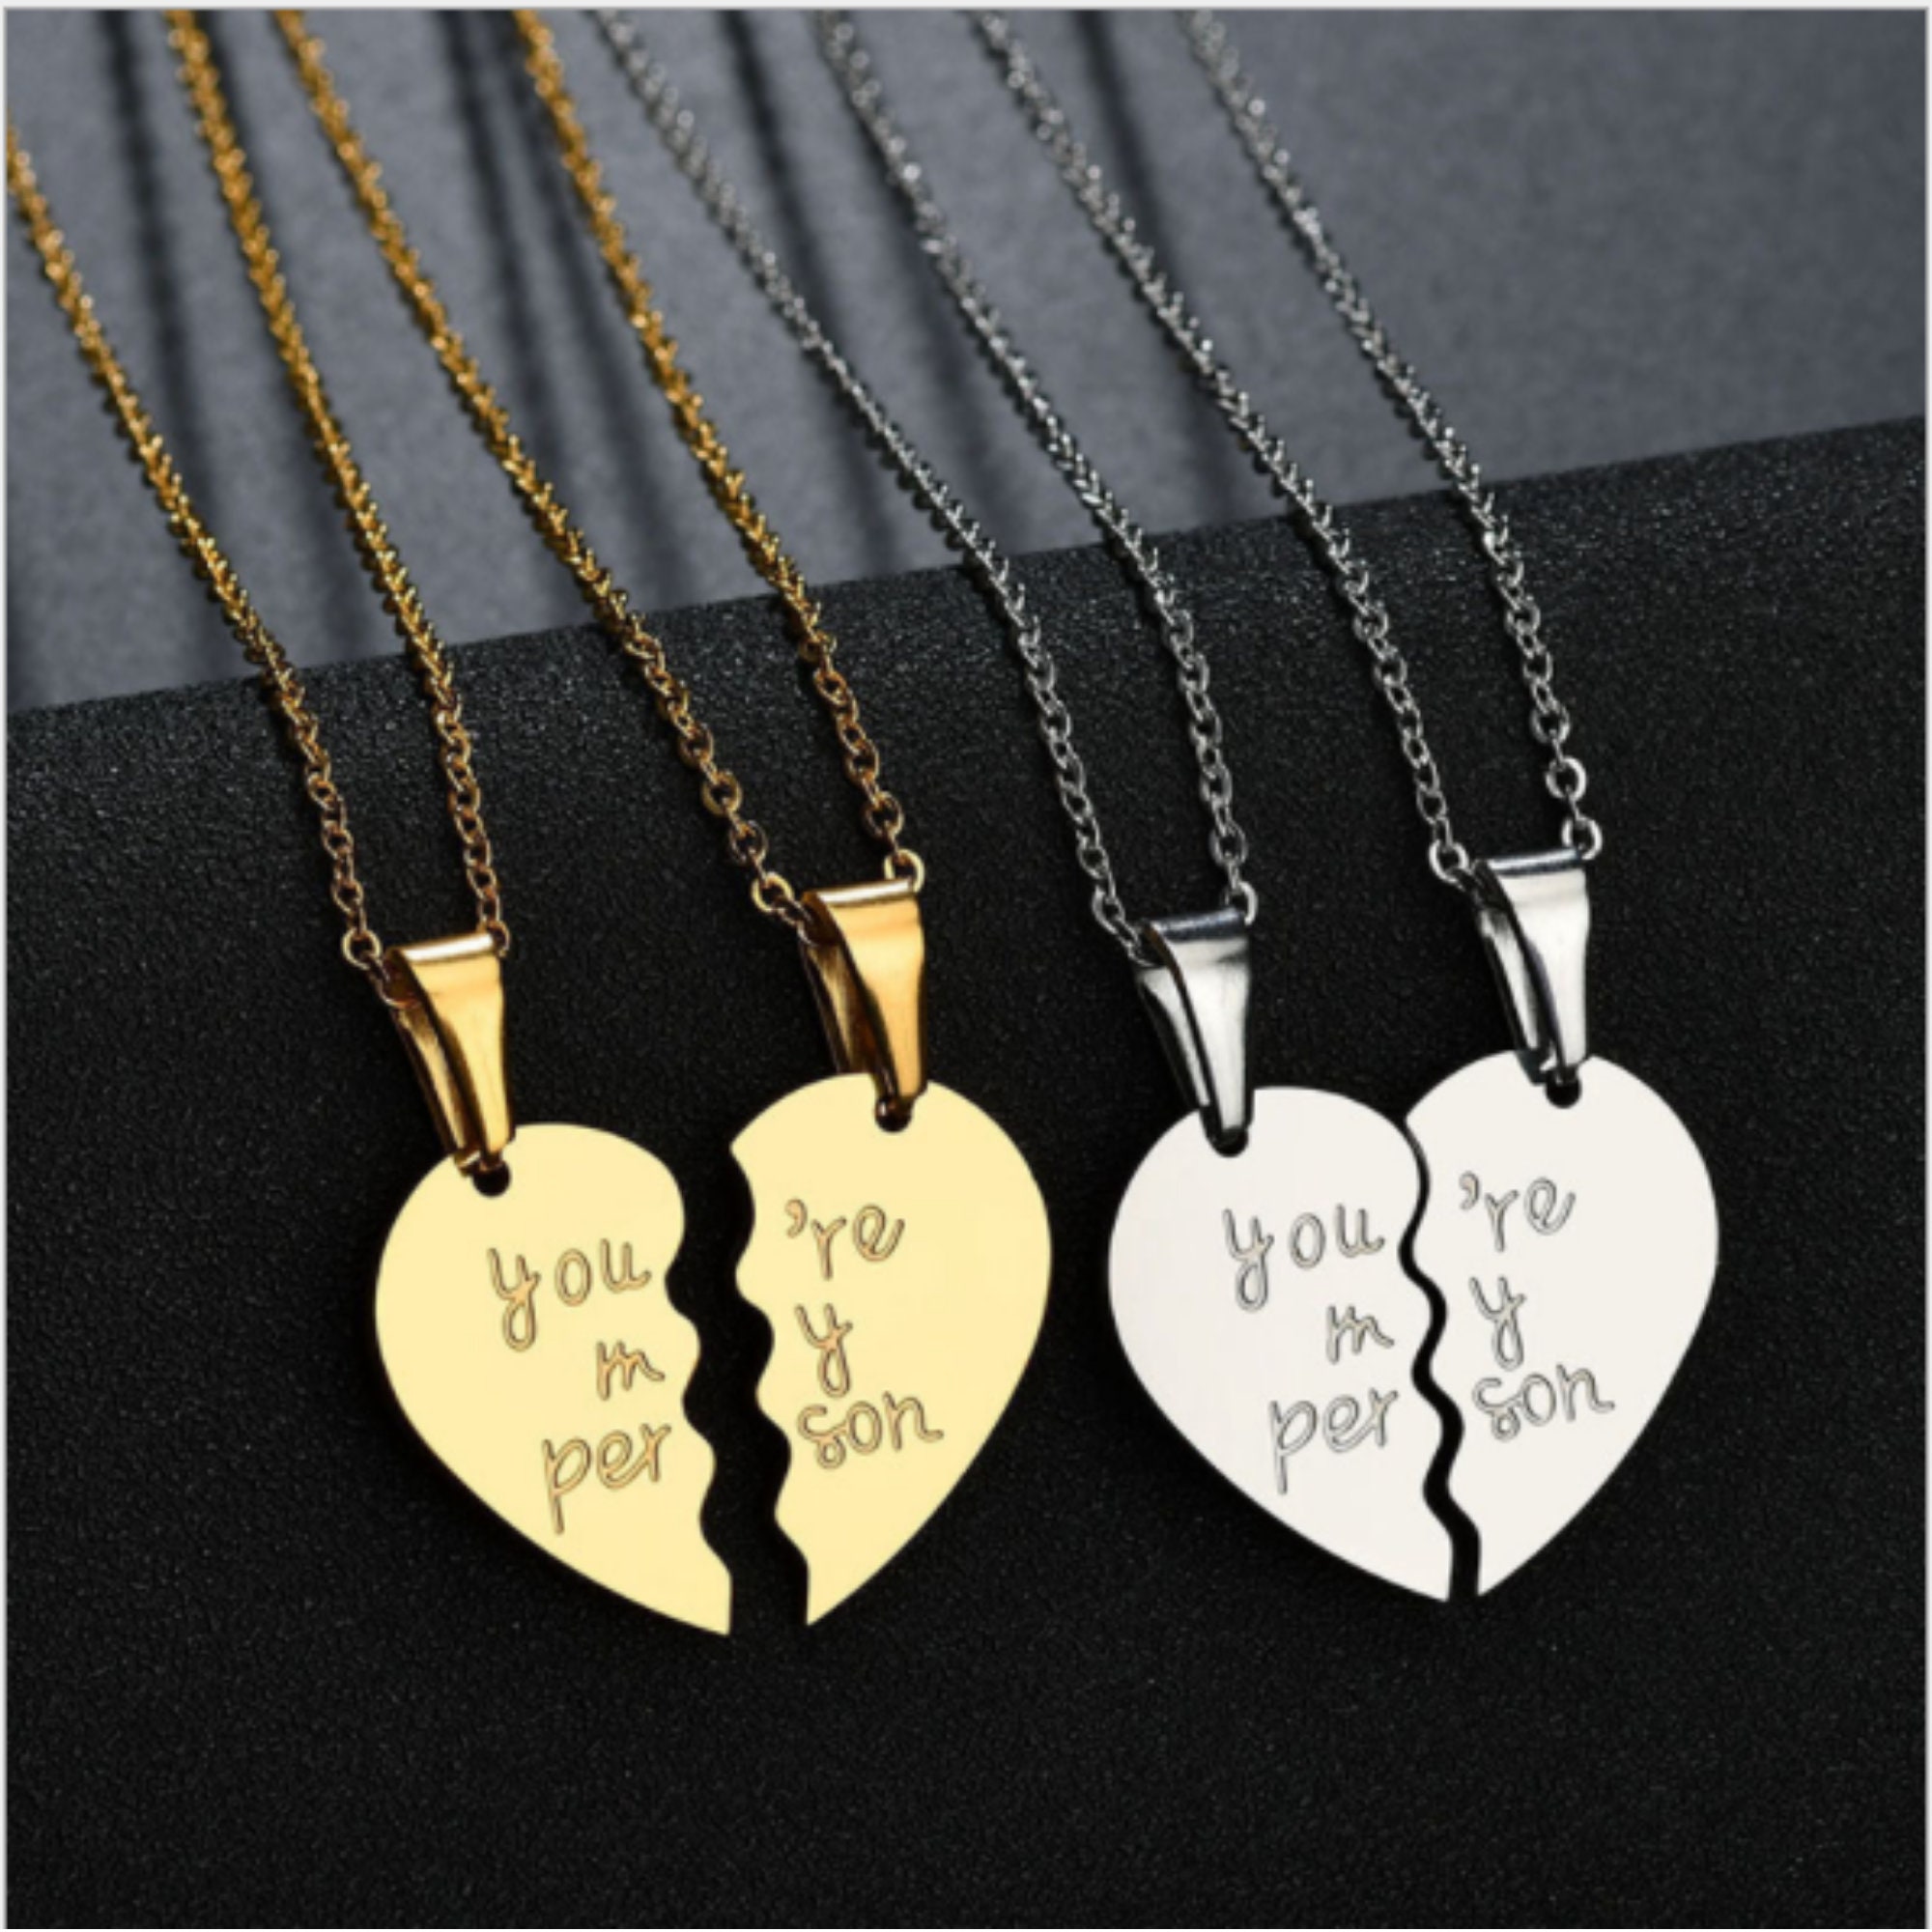 Fall In Love necklace